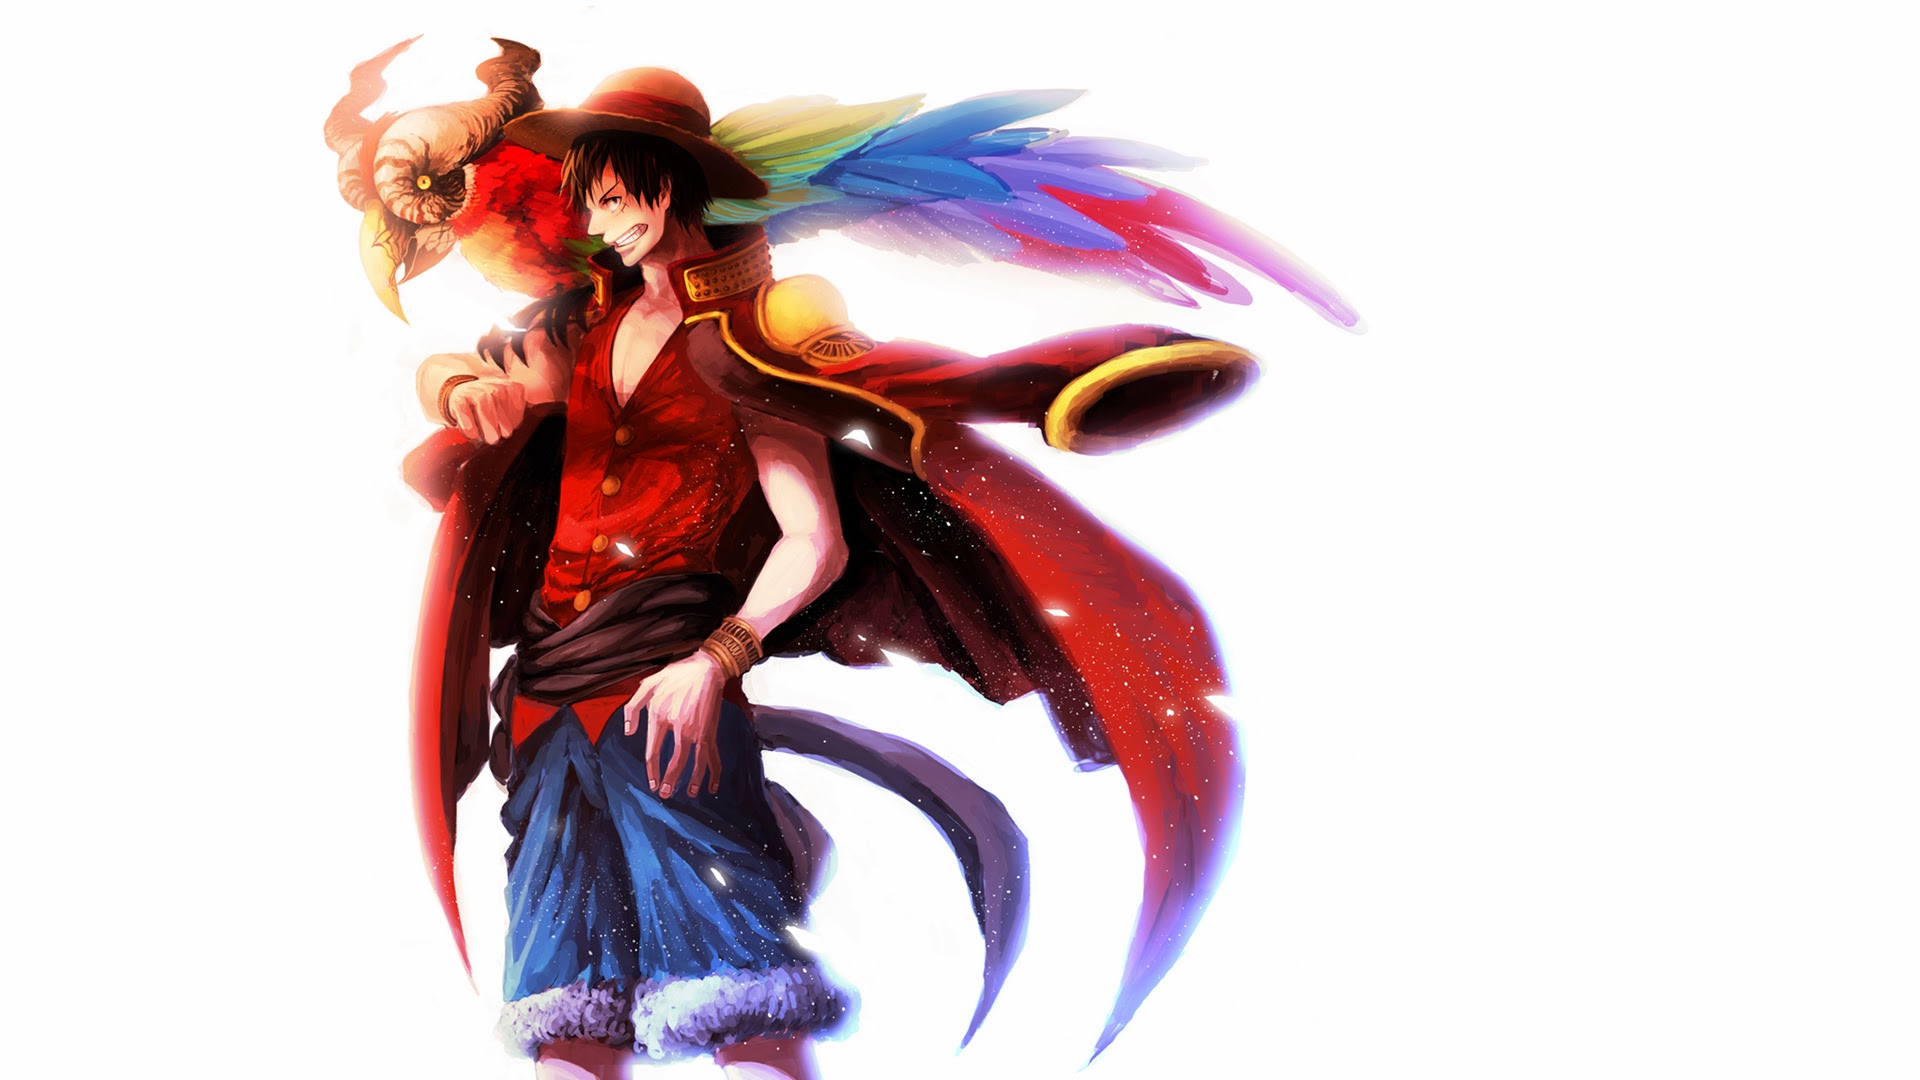 pirate king luffy one piece anime hd wallpaper 1920x1080 2a 1920x1080